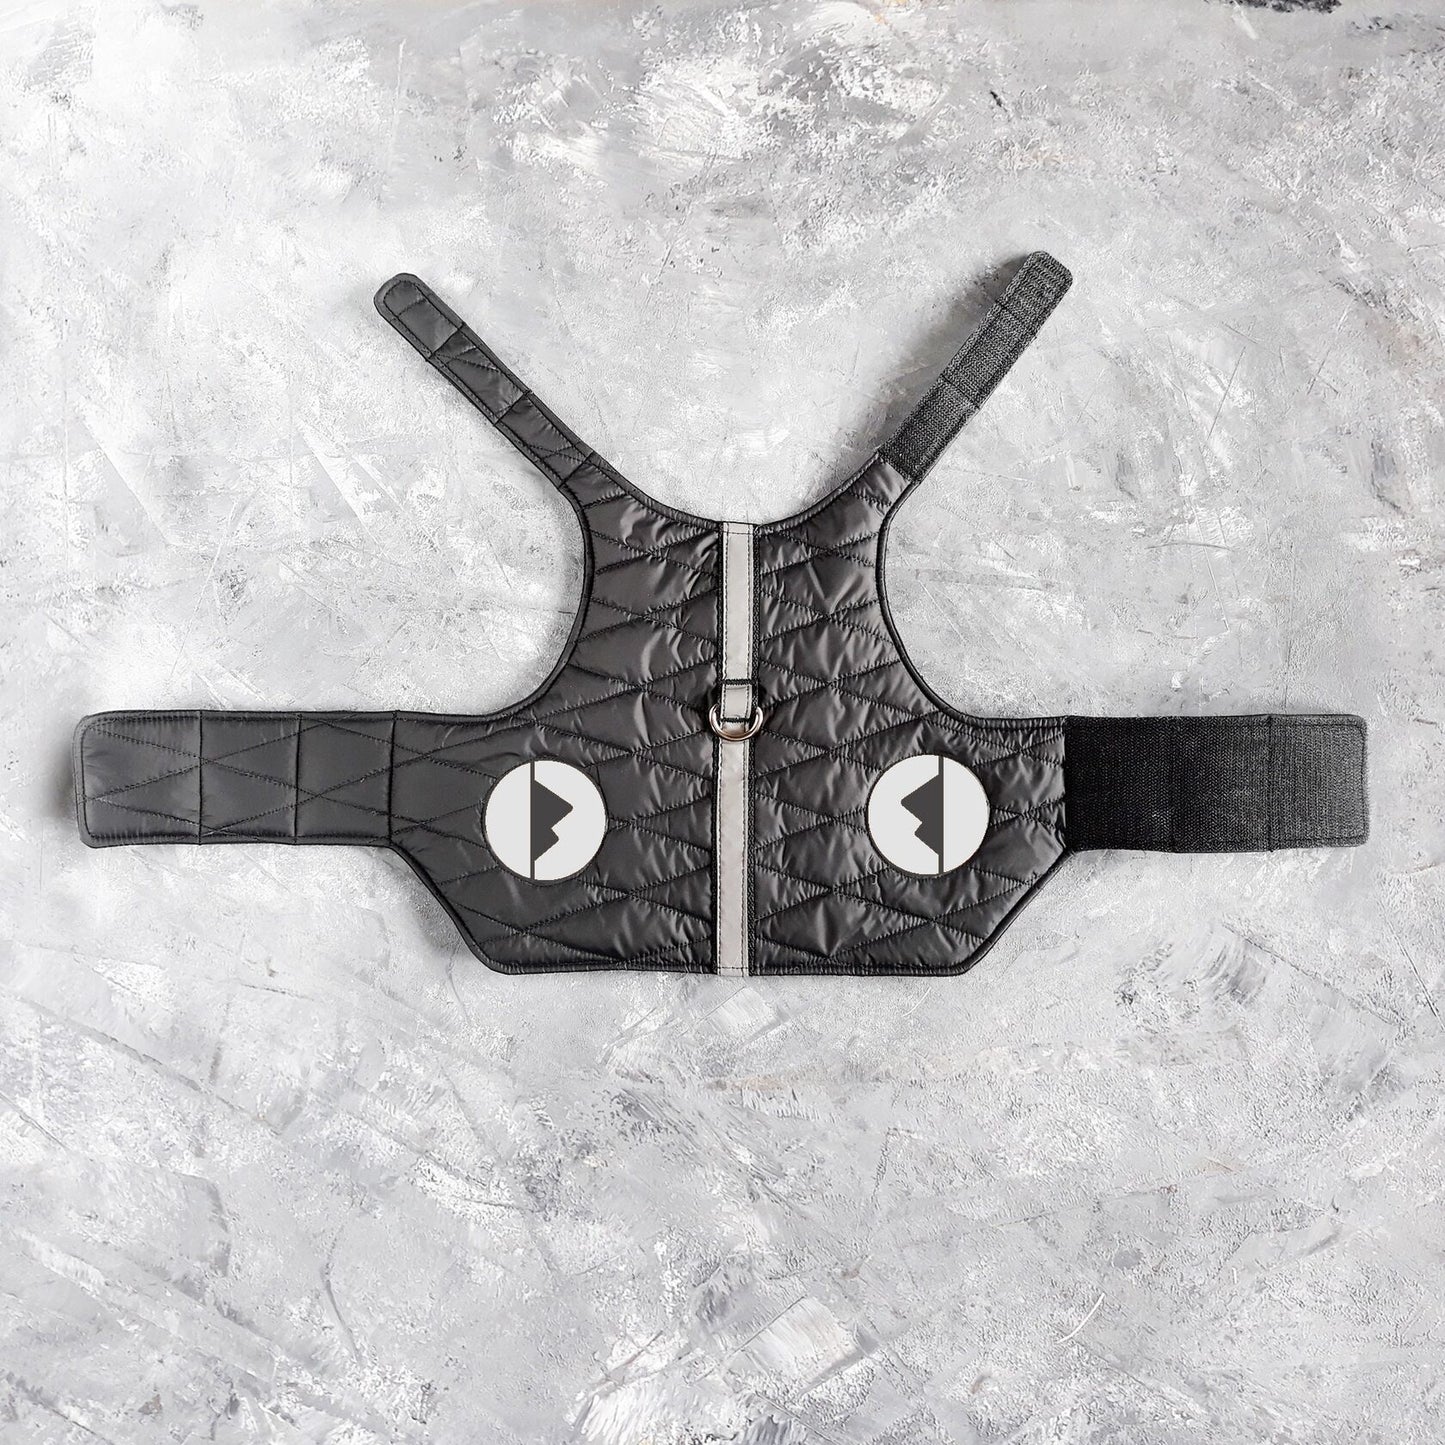 Difficult to escape warm safety quilted cat harness with reflective patches